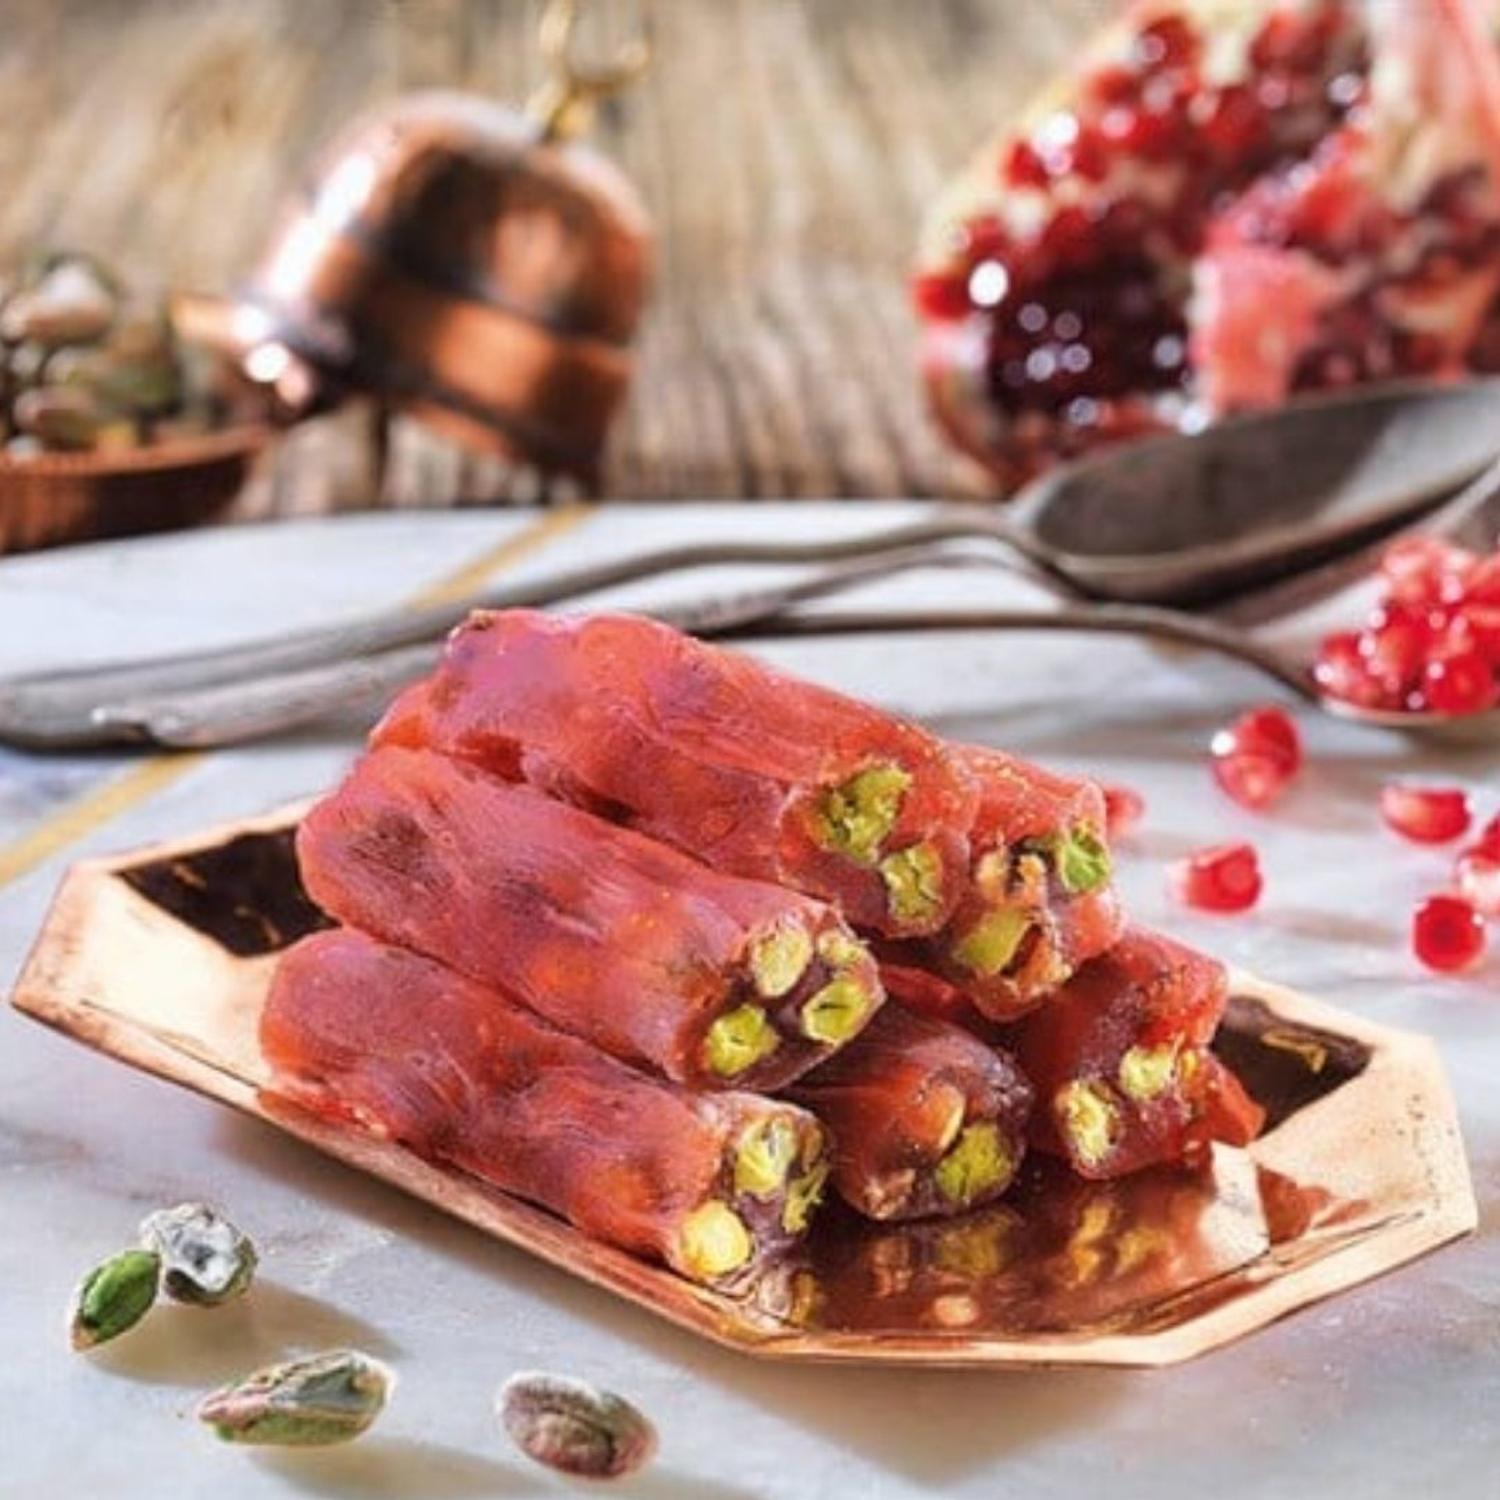 Picture of MEVLANA TURKISH DELIGHT FINGER WITH PISTACHIO AND POMEGRANATE FLAVOR